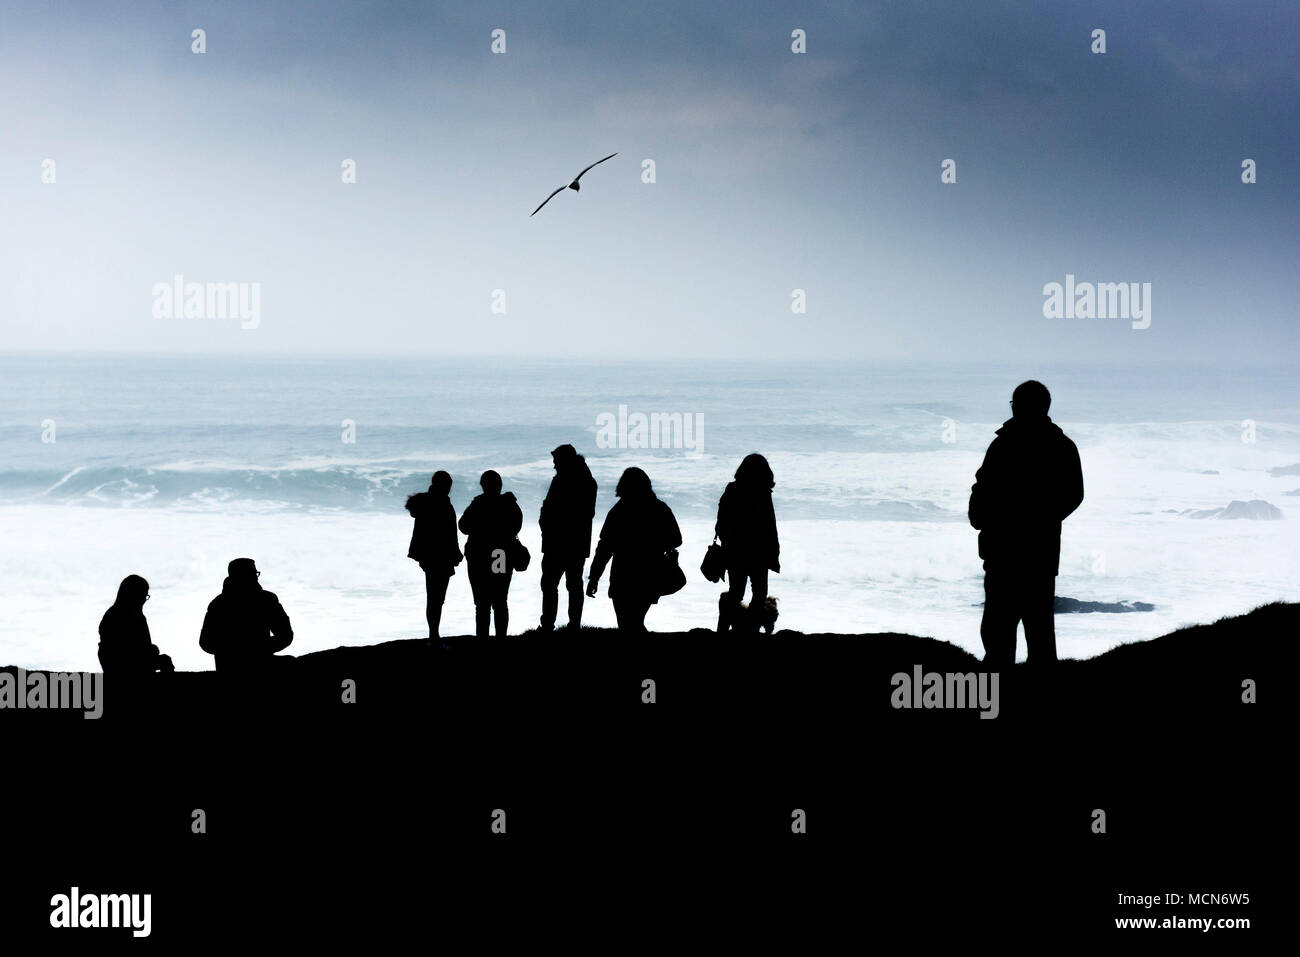 A group of people seen in silhouette as they stand on the coast overlooking the sea. Stock Photo